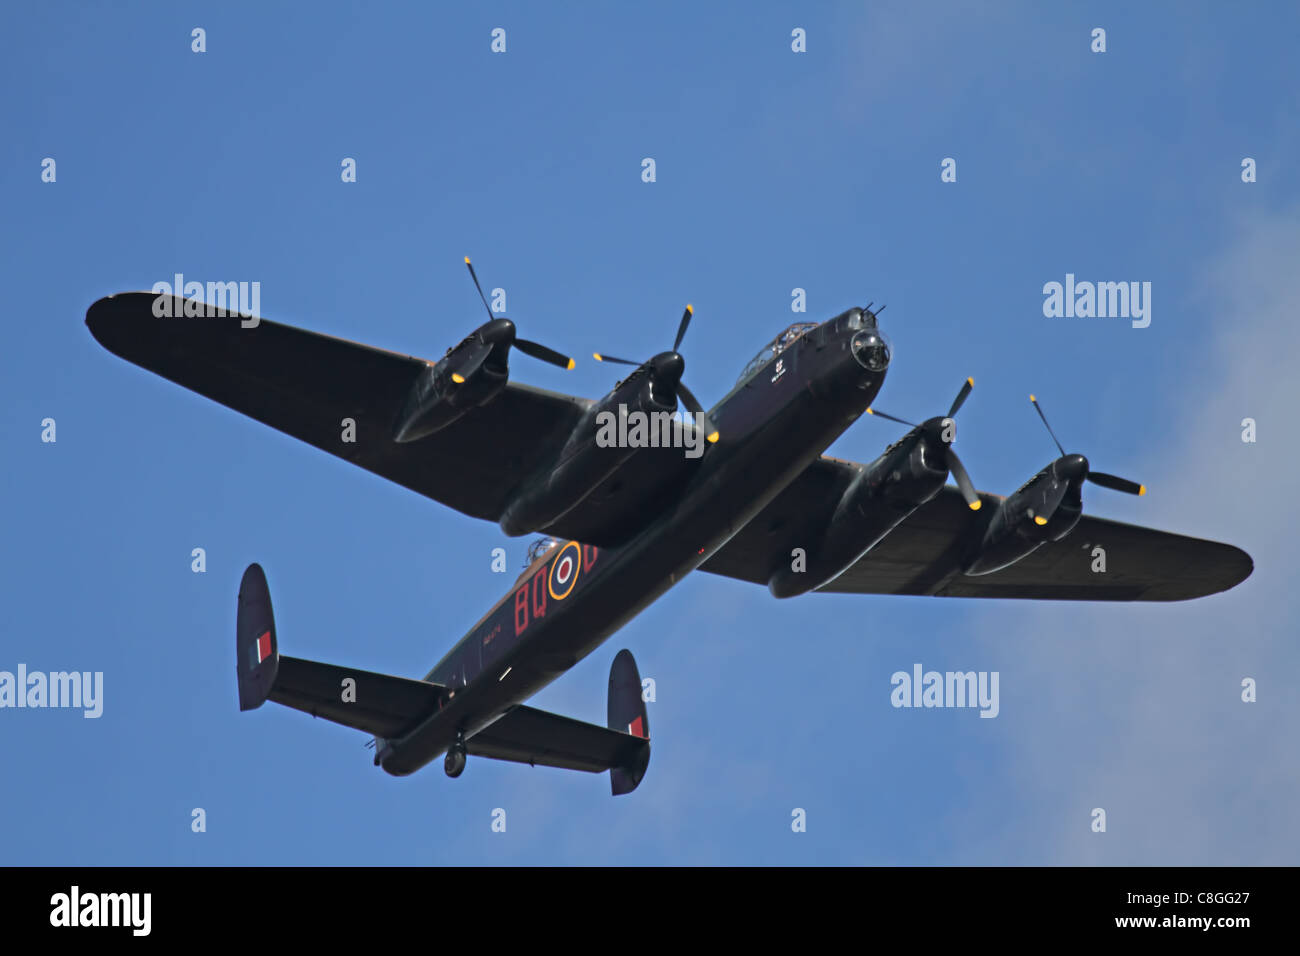 a restored WW2 lancaster bomber flying low Stock Photo